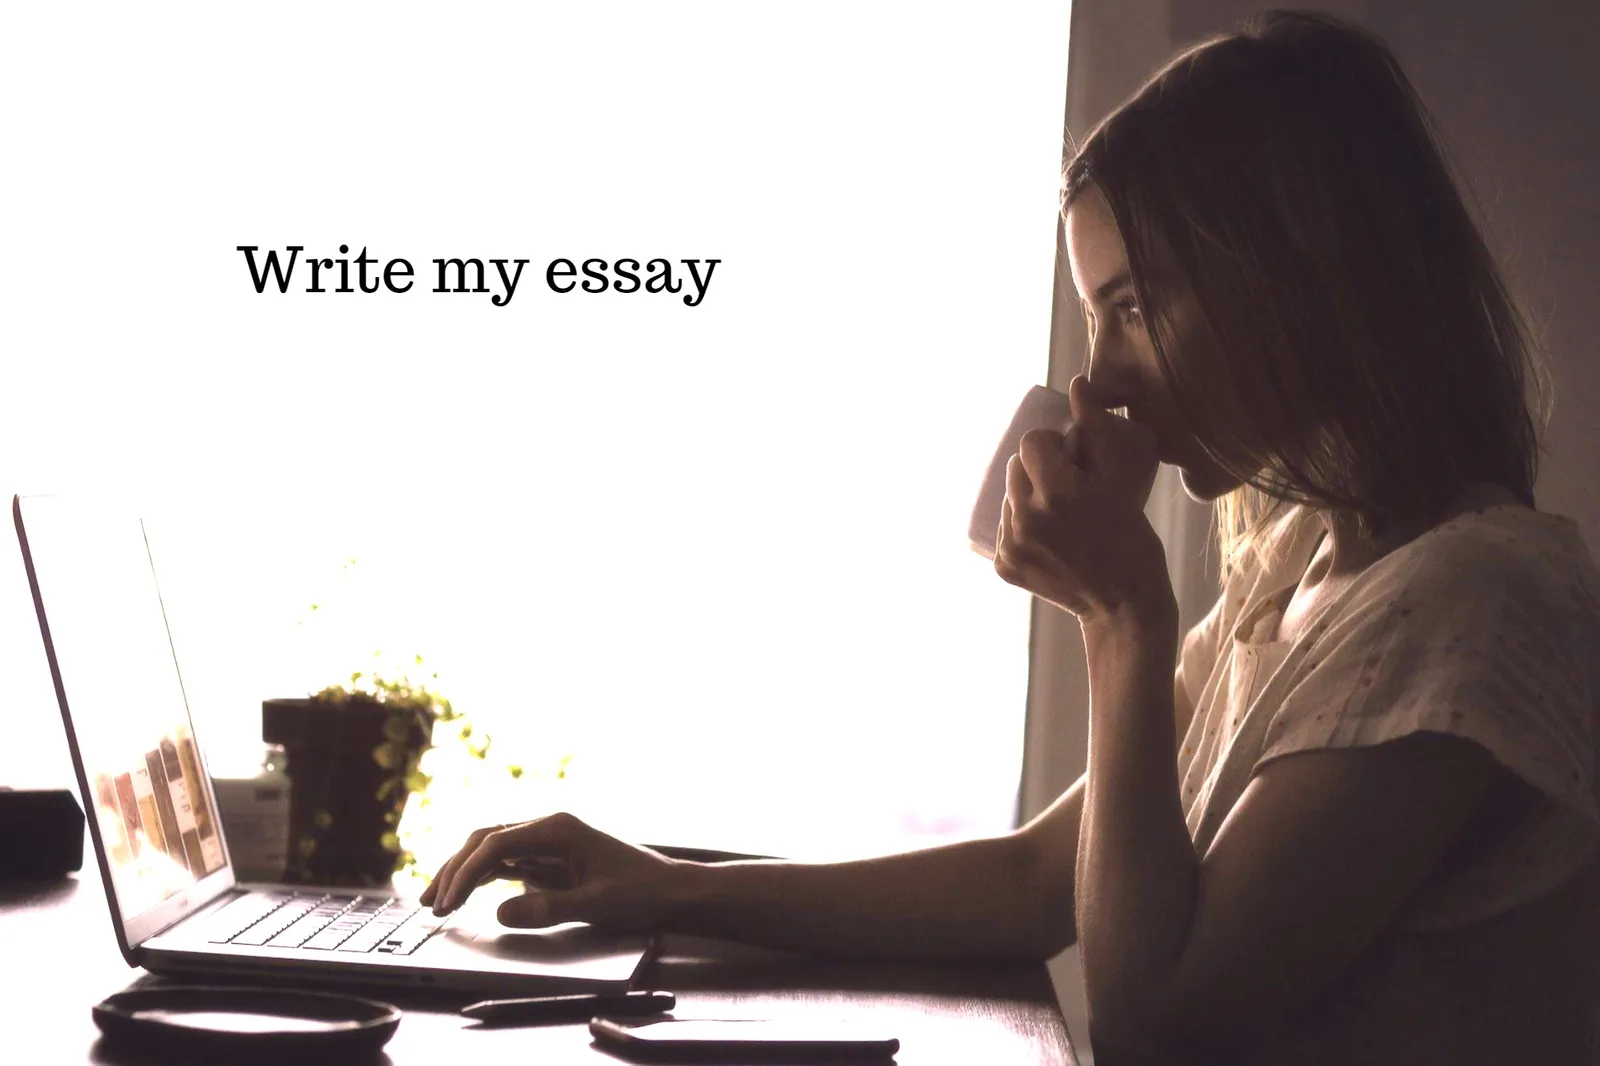 Write My Essay for Me | Hire Pro Essay Writers Online 24/7